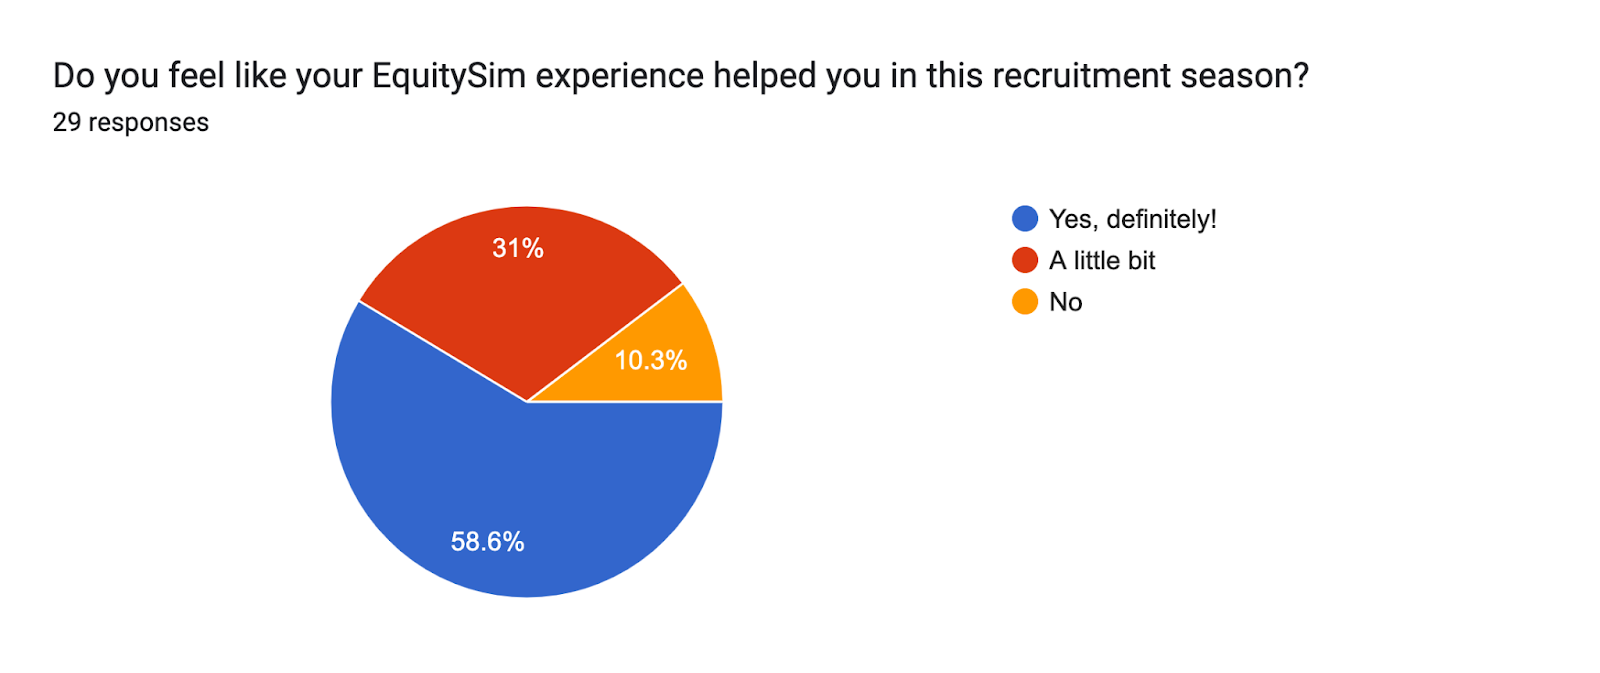 Forms response chart. Question title: Do you feel like your EquitySim experience helped you in this recruitment season?. Number of responses: 29 responses.